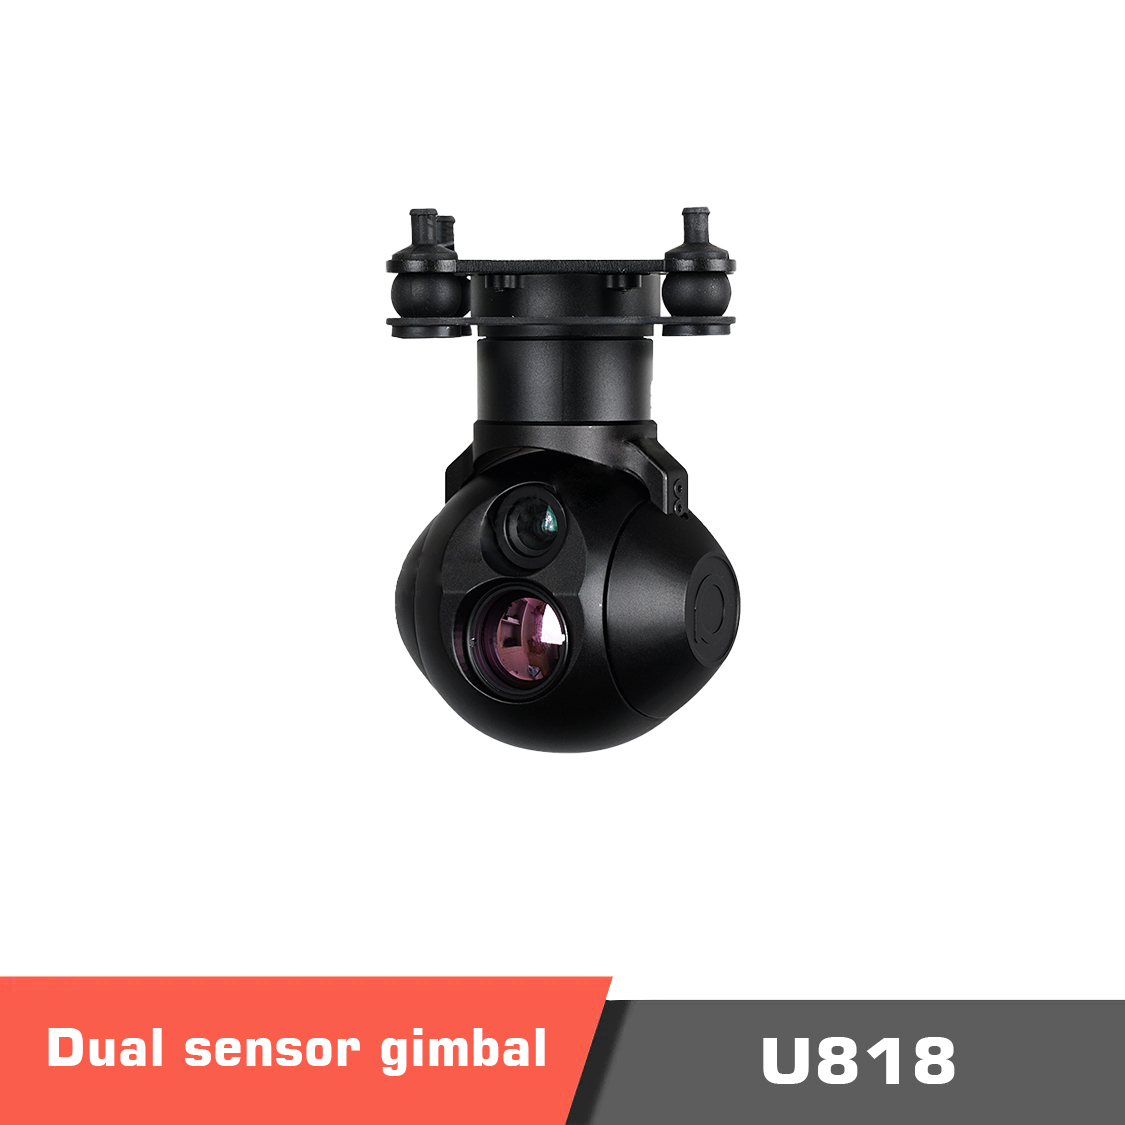 1 5 - q7der / q7de gimbal camera, micro prime lens, gimbal camera, q7de gimbal, q7de gimbal camera, ai object identification, dual ir sensors, pip format, dual electro-optical sensors, dual eo sensors, dual eo, dual ir, picture in picture, hawkeye series, dual eo/ir object tracking, gimbal camera for surveillance, q7der gimbal, lightweight gimbal camera, realize car and human, automatic recognition, super lightweight gimbal camera, drone camera, brushless gimbal, camera stabilizer gimbal, dual sensor, micro gimbal, micro dual sensor, drone tracking, surveillance gimbal, surveillance camera, large area reconnaissance, industrial use, industrial applications, zoom camera, optical zoom camera, gimbal zoom camera, zoom gimbal, q7der gimbal camera - motionew - 1